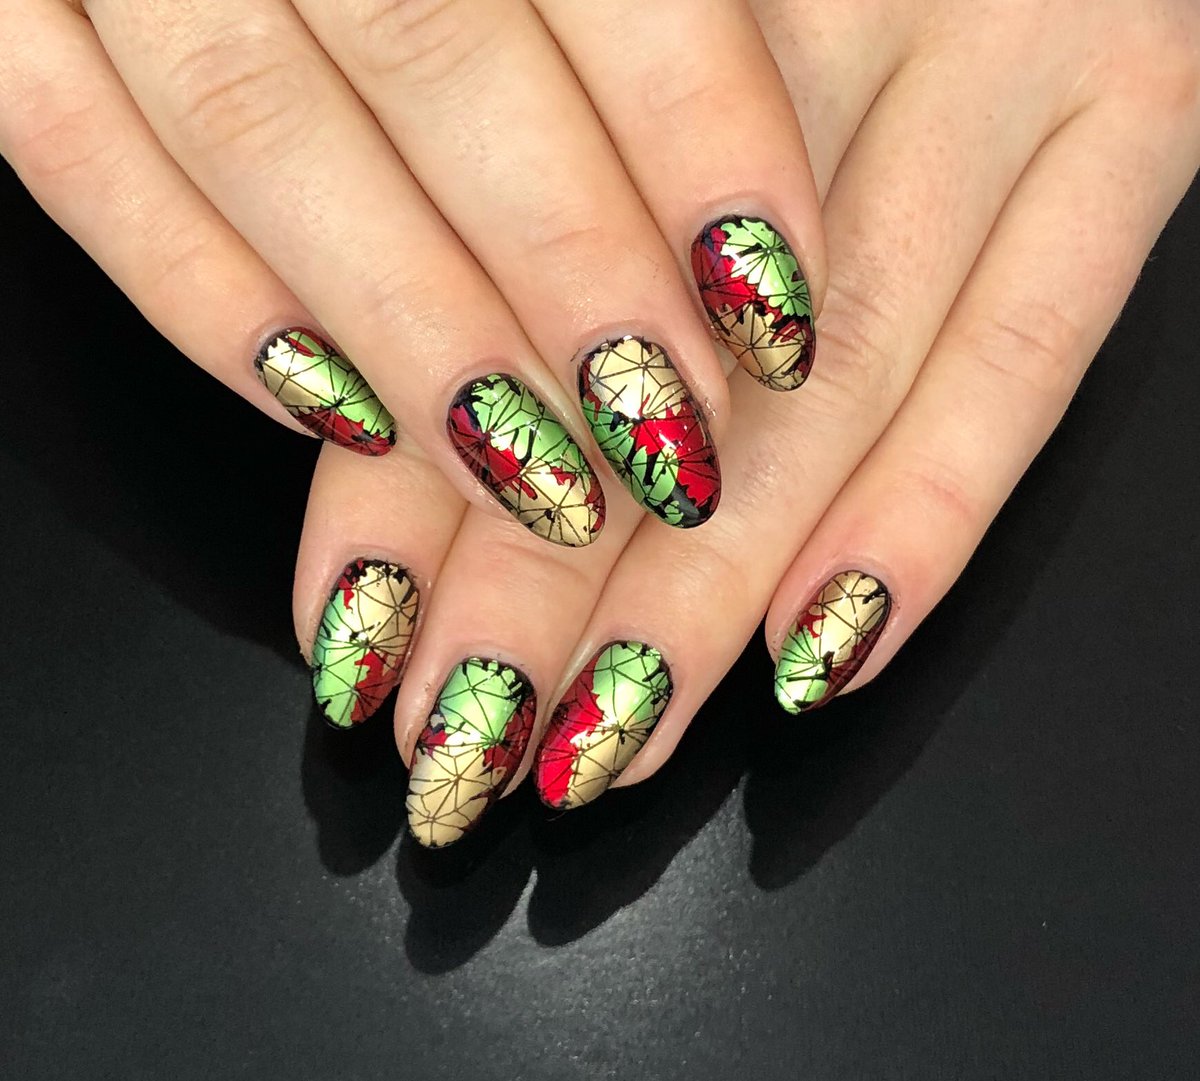 Loved creating these using a selection of the best products in the nail industry...! 😍 @CNDWorld @SweetSquared @lovelecente @YoursCosmetics  #nails #nailarr #foilnailart #stamping #stampingnailart #londonmanicurist #onlythebest